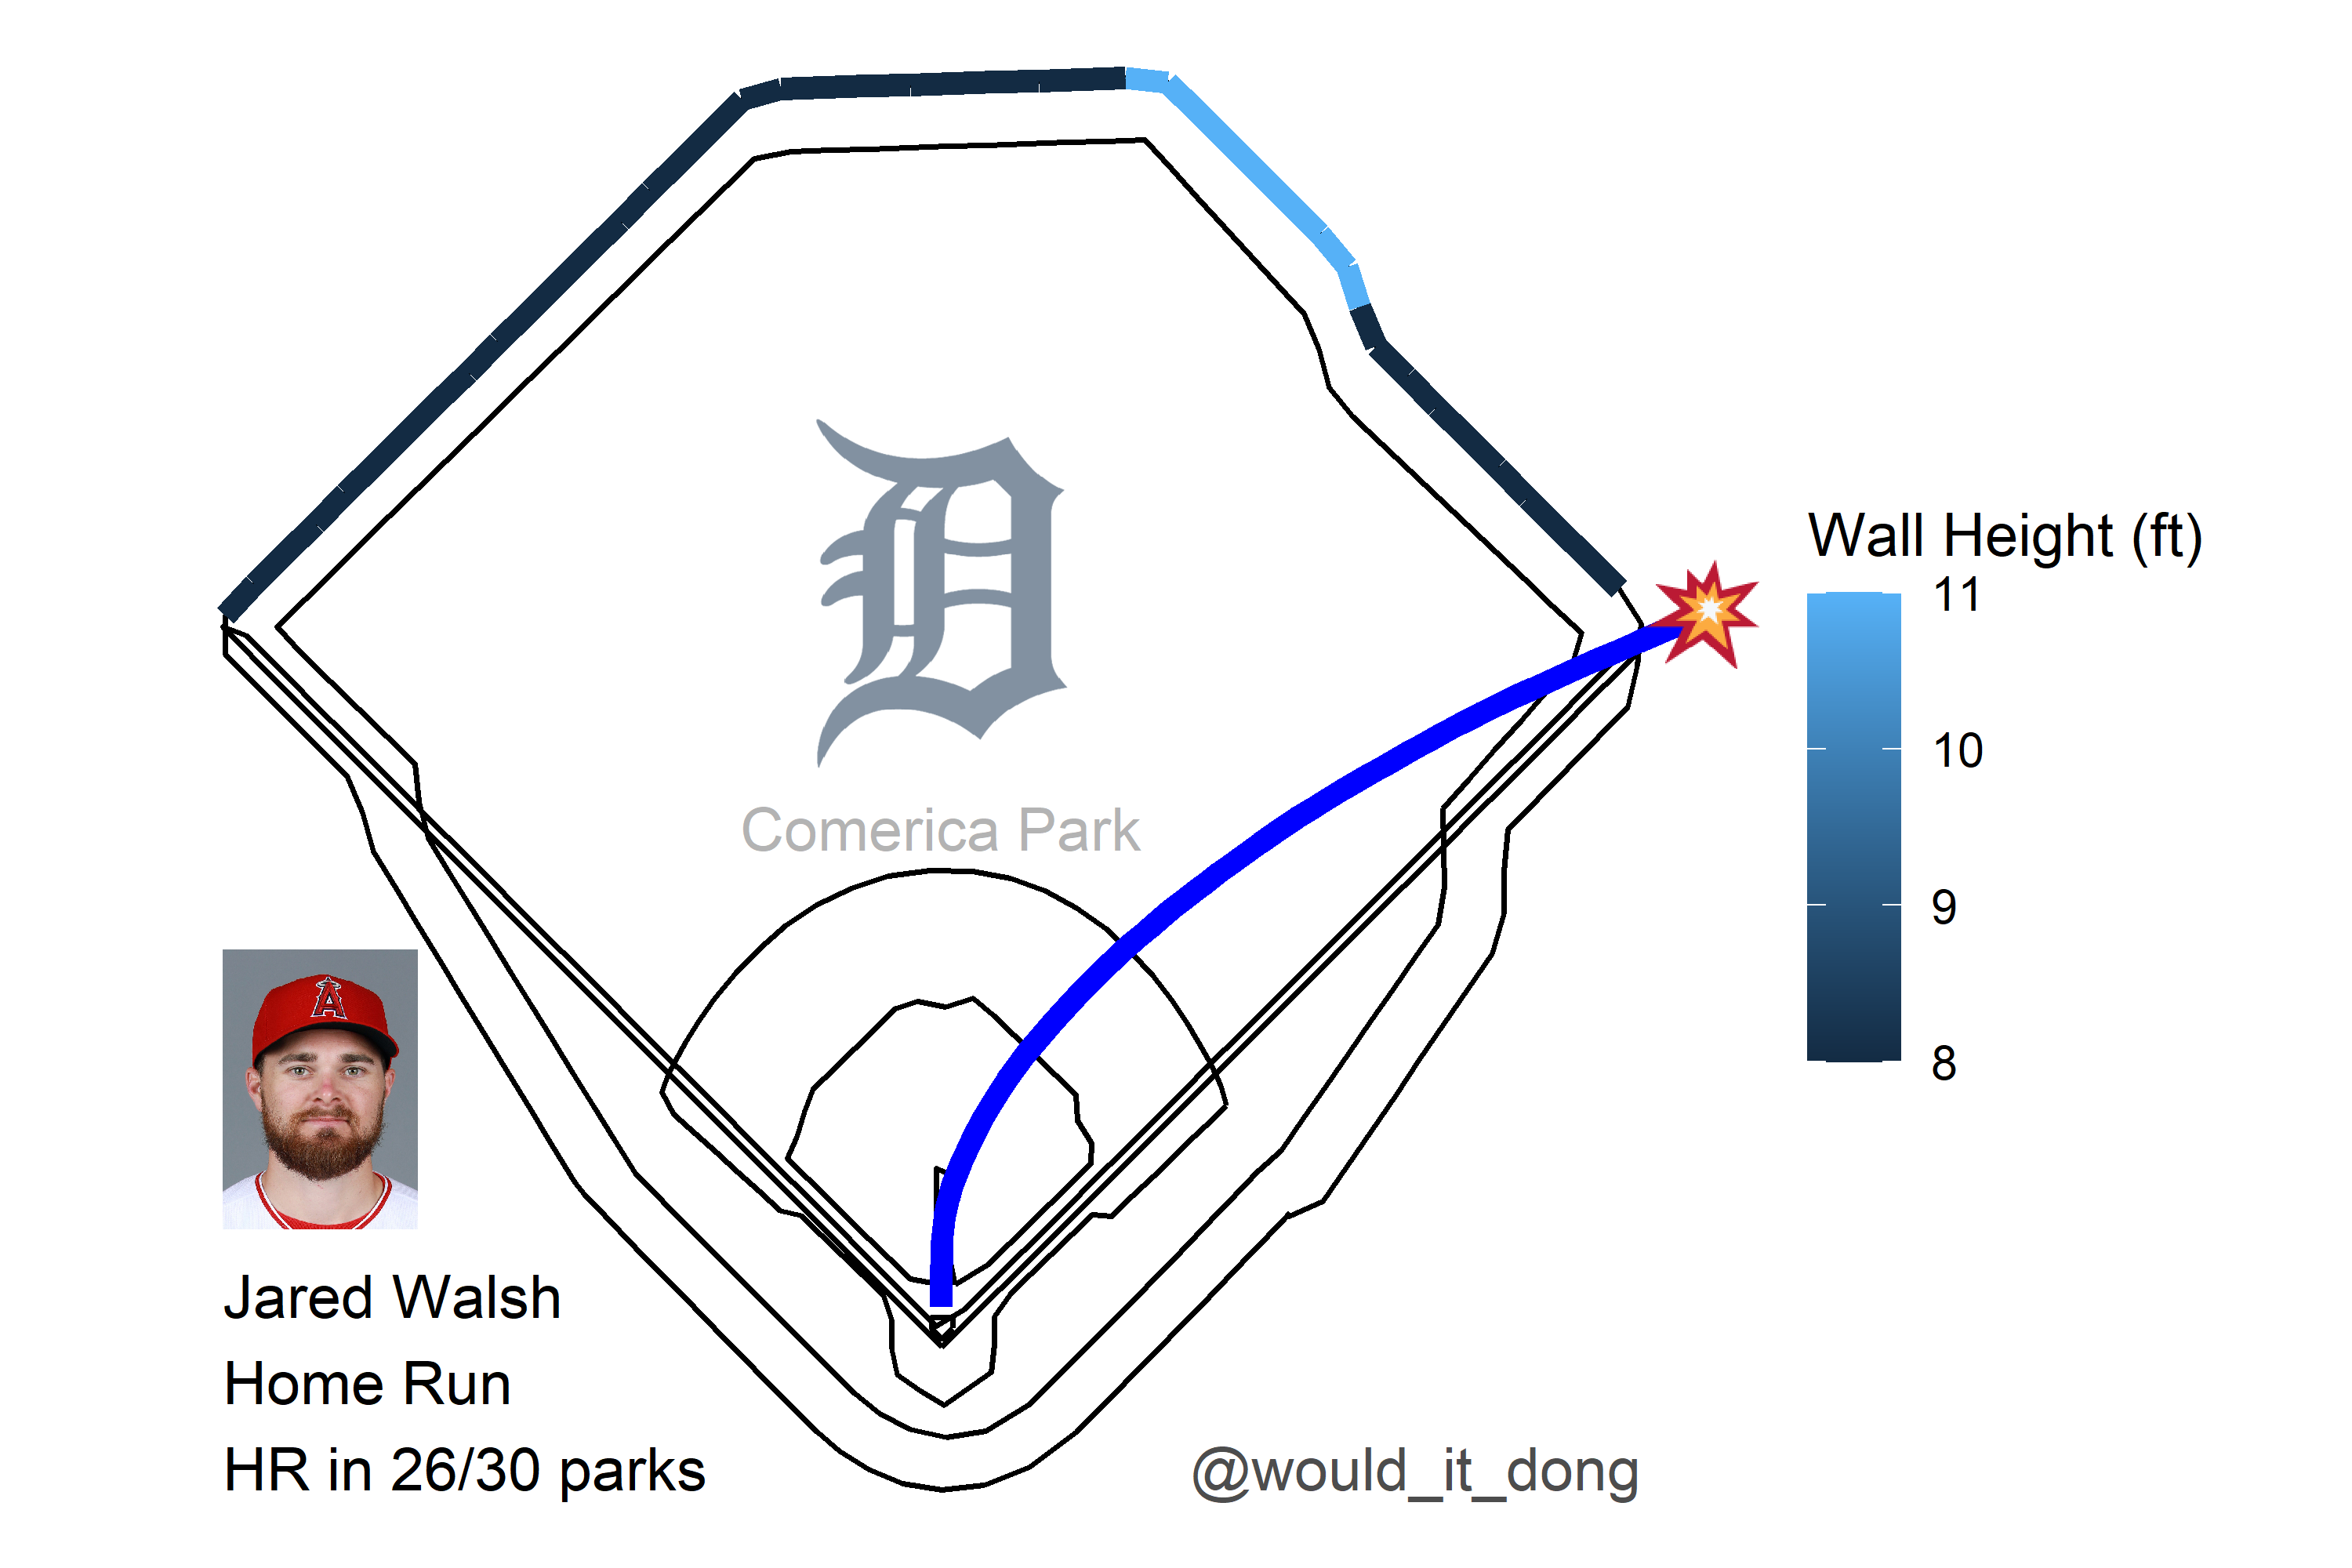 Would it dong? on X: Jared Walsh vs Matt Manning #GoHalos Home Run 💣 Exit  velo: 110 mph Launch angle: 22 deg Proj. distance: 353 ft This would have  been a home